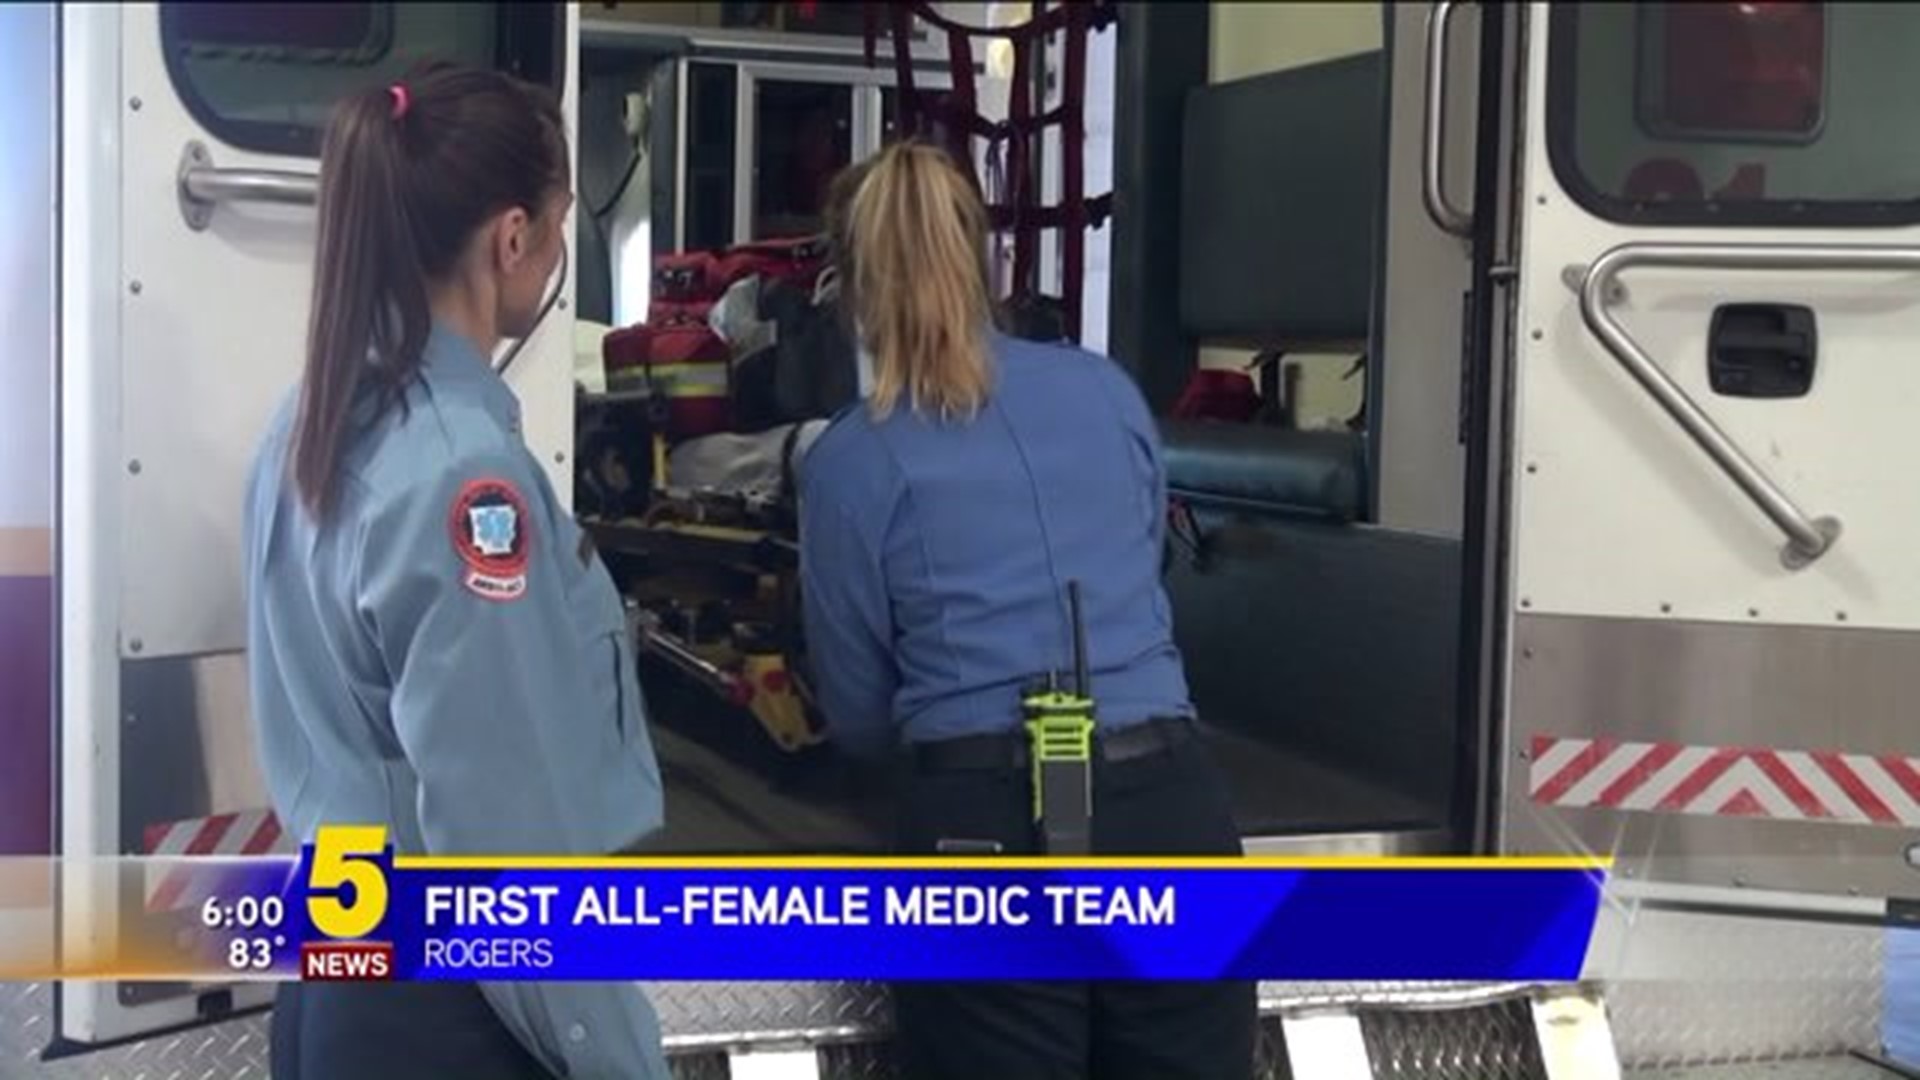 FIRST ALL-FEMALE MEDIC CREW